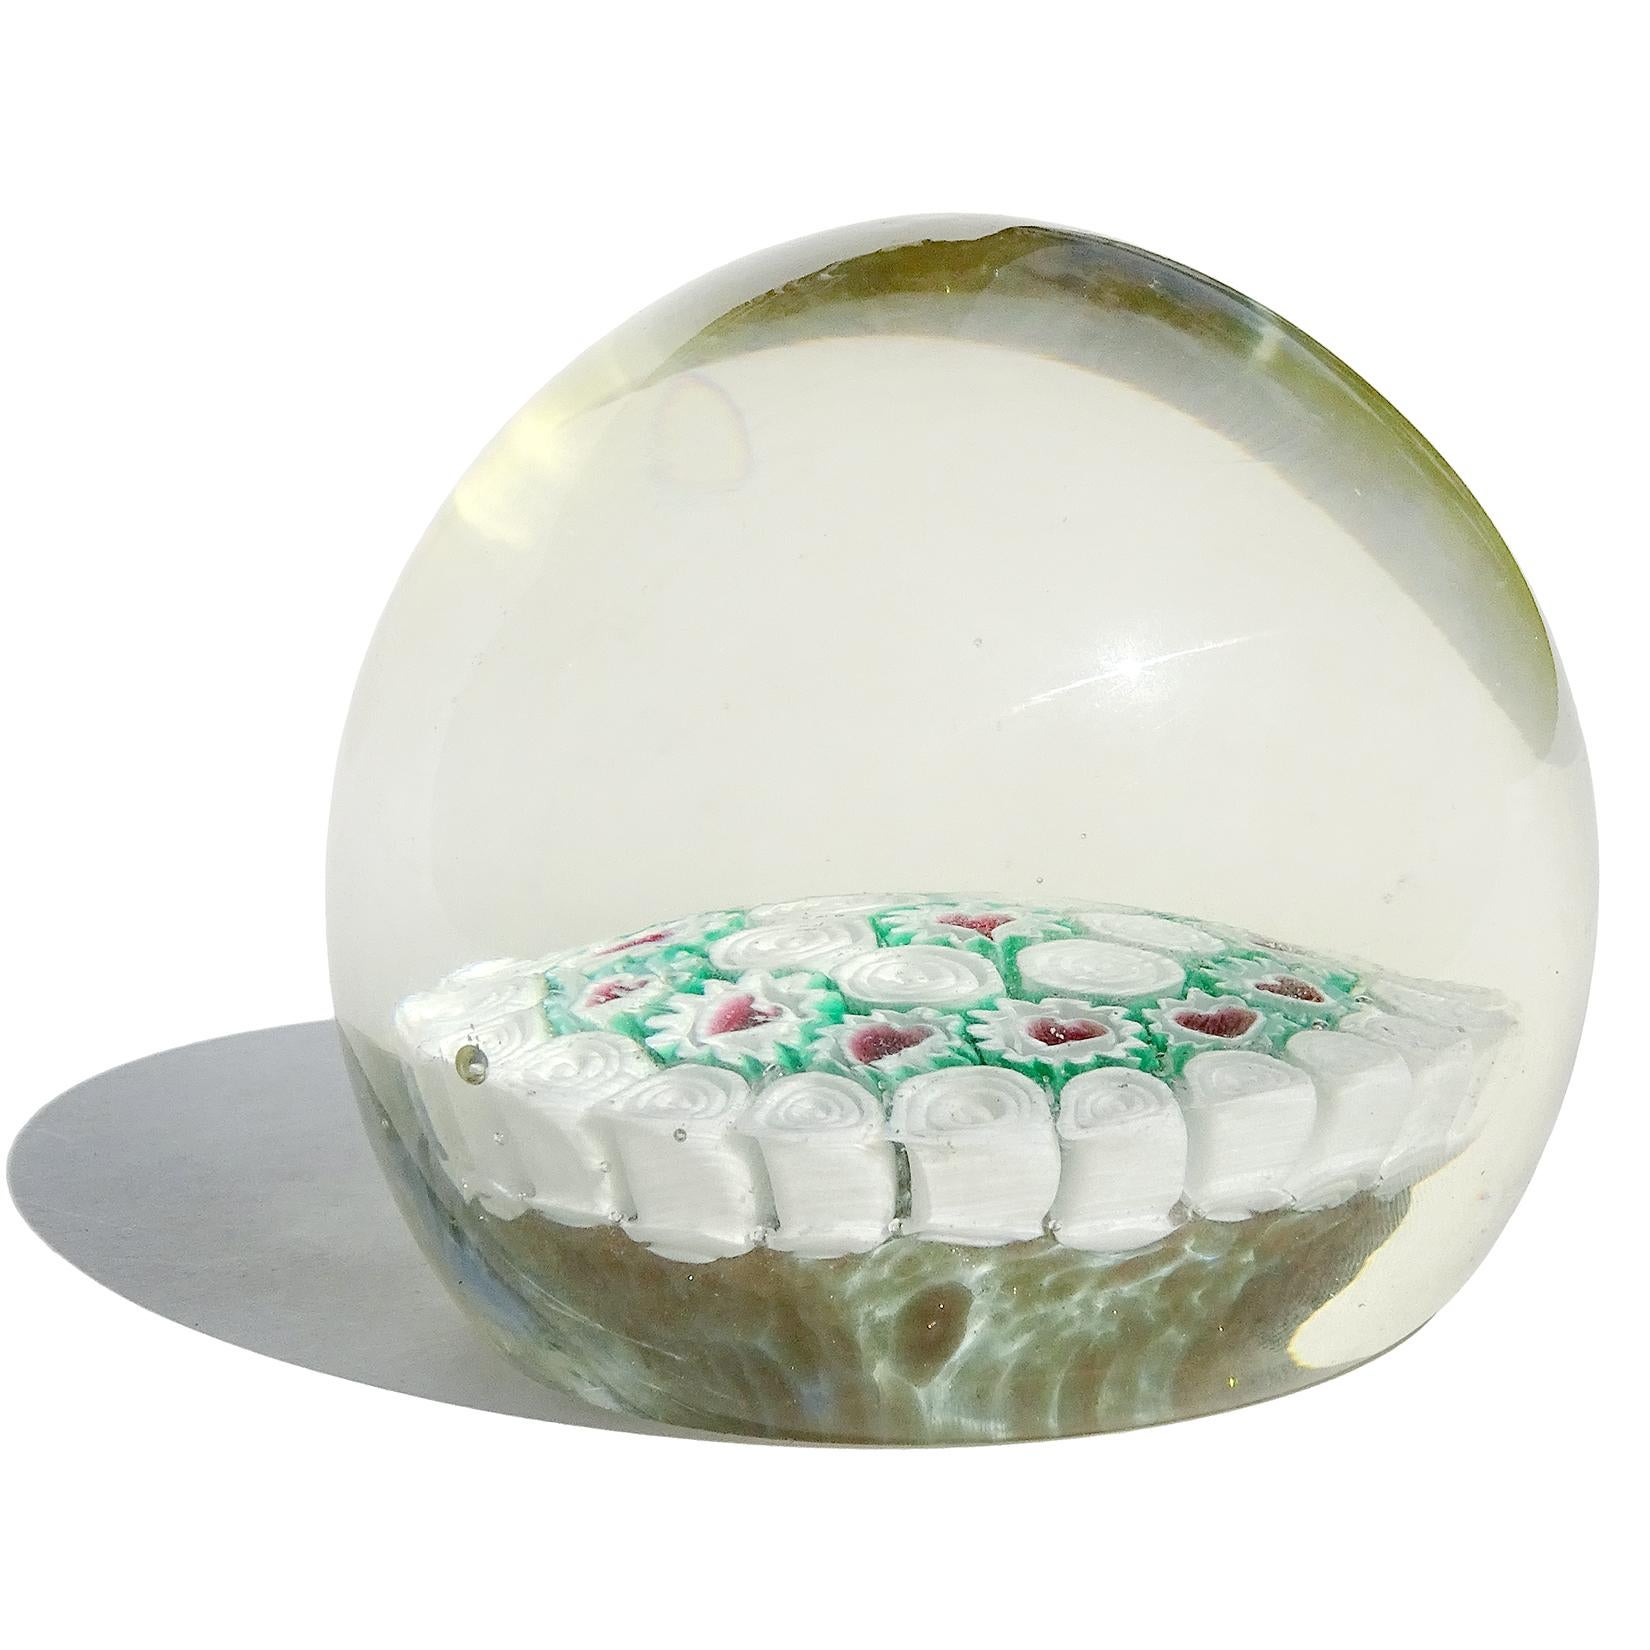 Beautiful and rare, vintage Murano hand blown millefiori flowers with heart centers and bullseye murrines Italian art glass paperweight. Documented to the Fratelli Toso Company. It has a red, white and green color combination. The piece has glittery